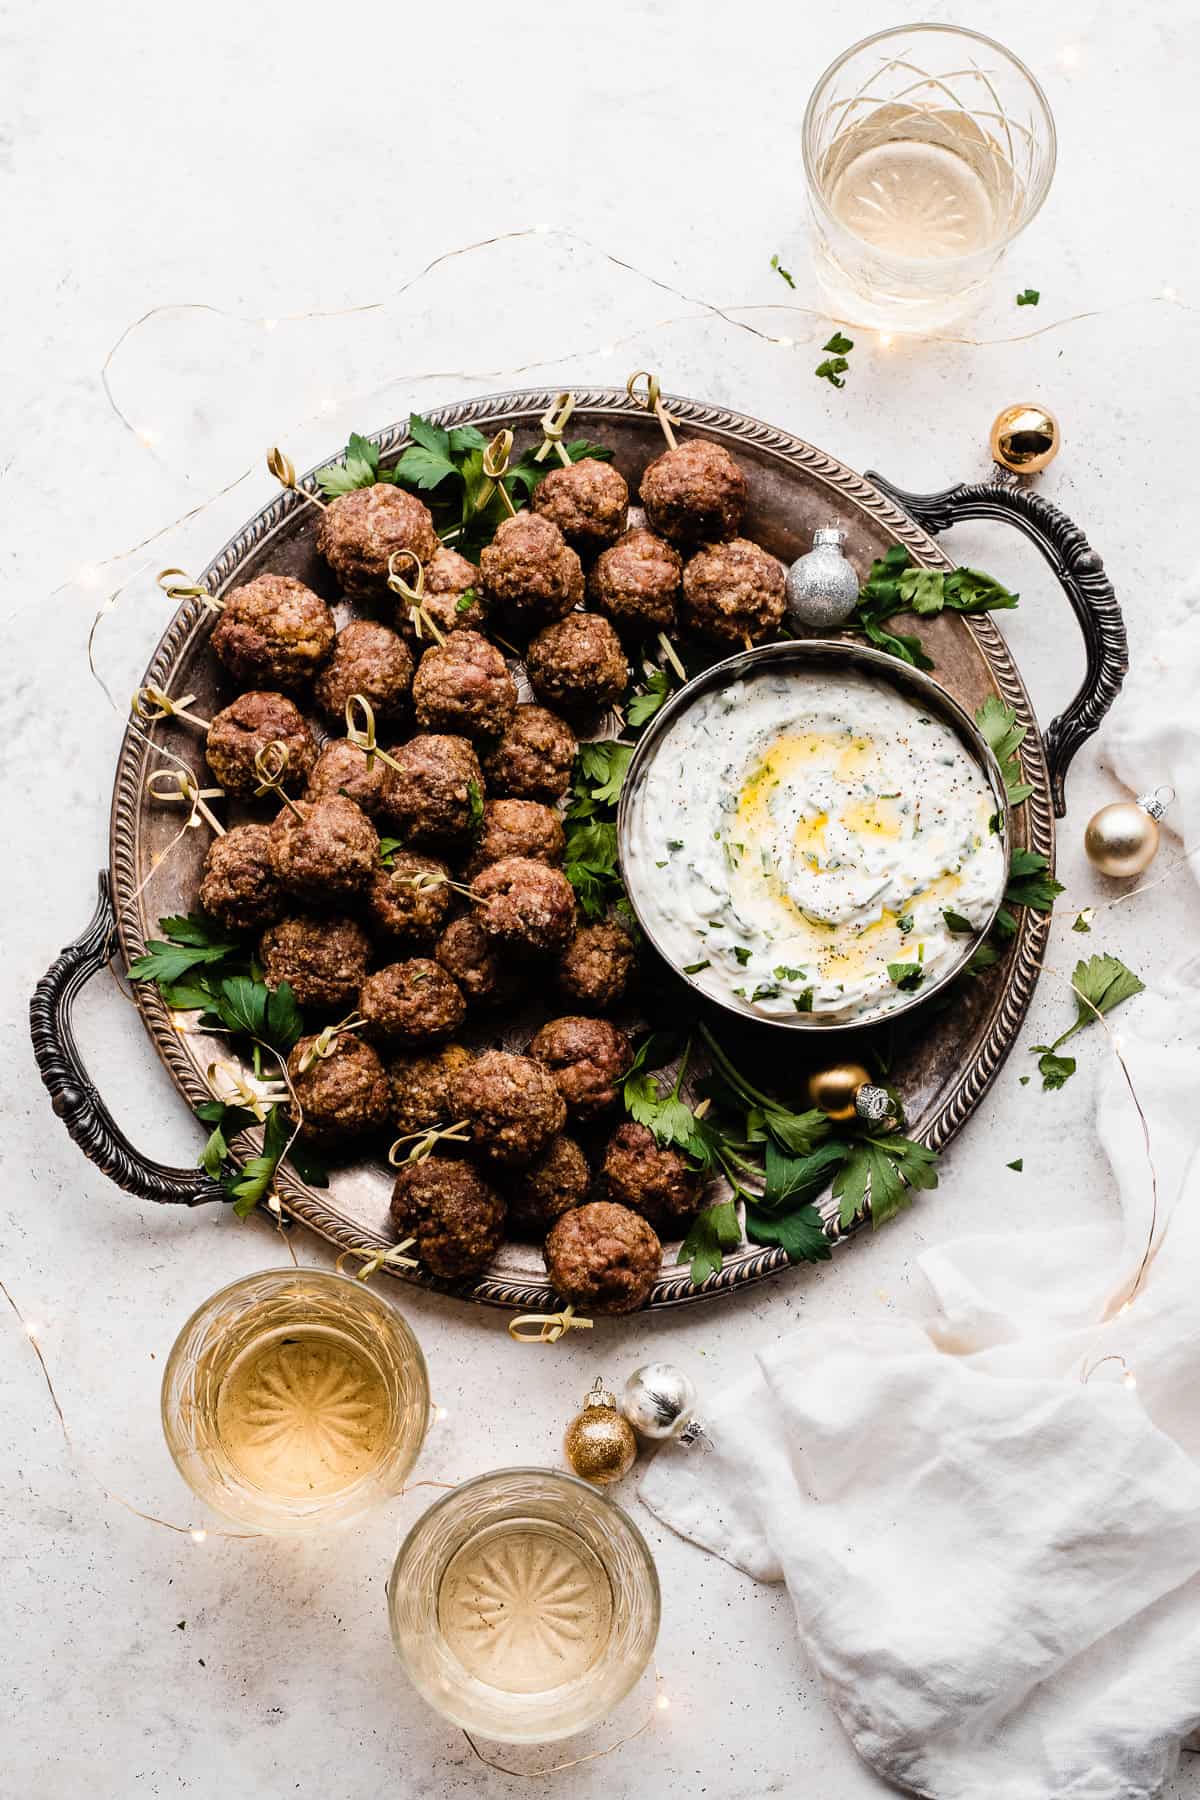 A platter of meatballs on skewers, with a bowl of yogurt dip and glasses of wine.